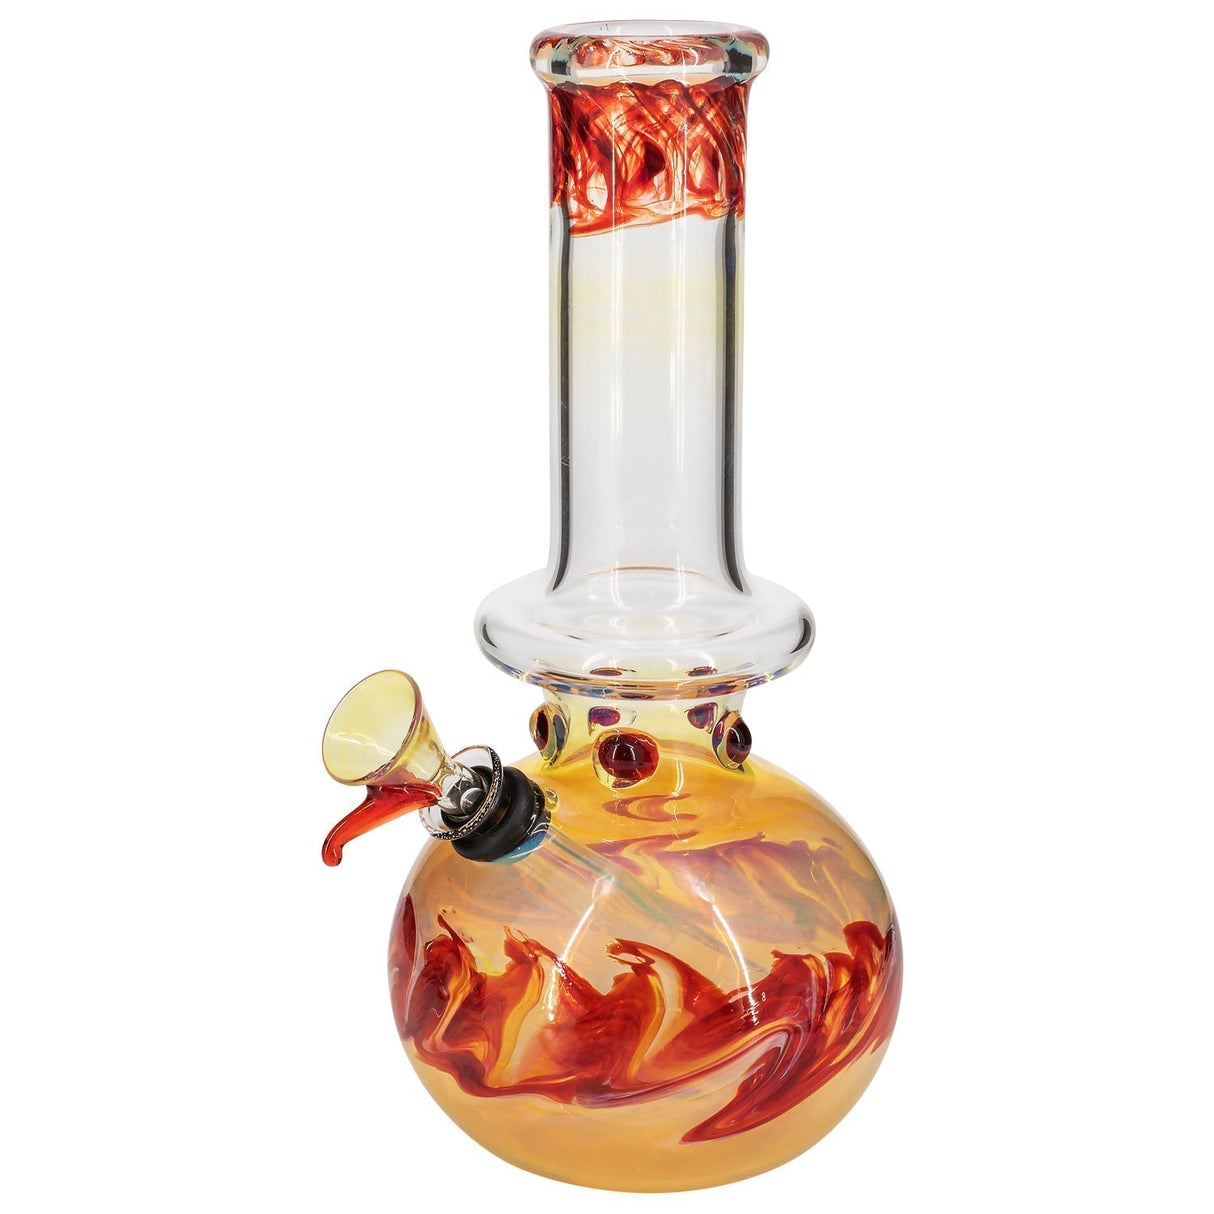 LA Pipes Time Traveler Silver Fumed Bubble Bong with Orange Accents, Front View